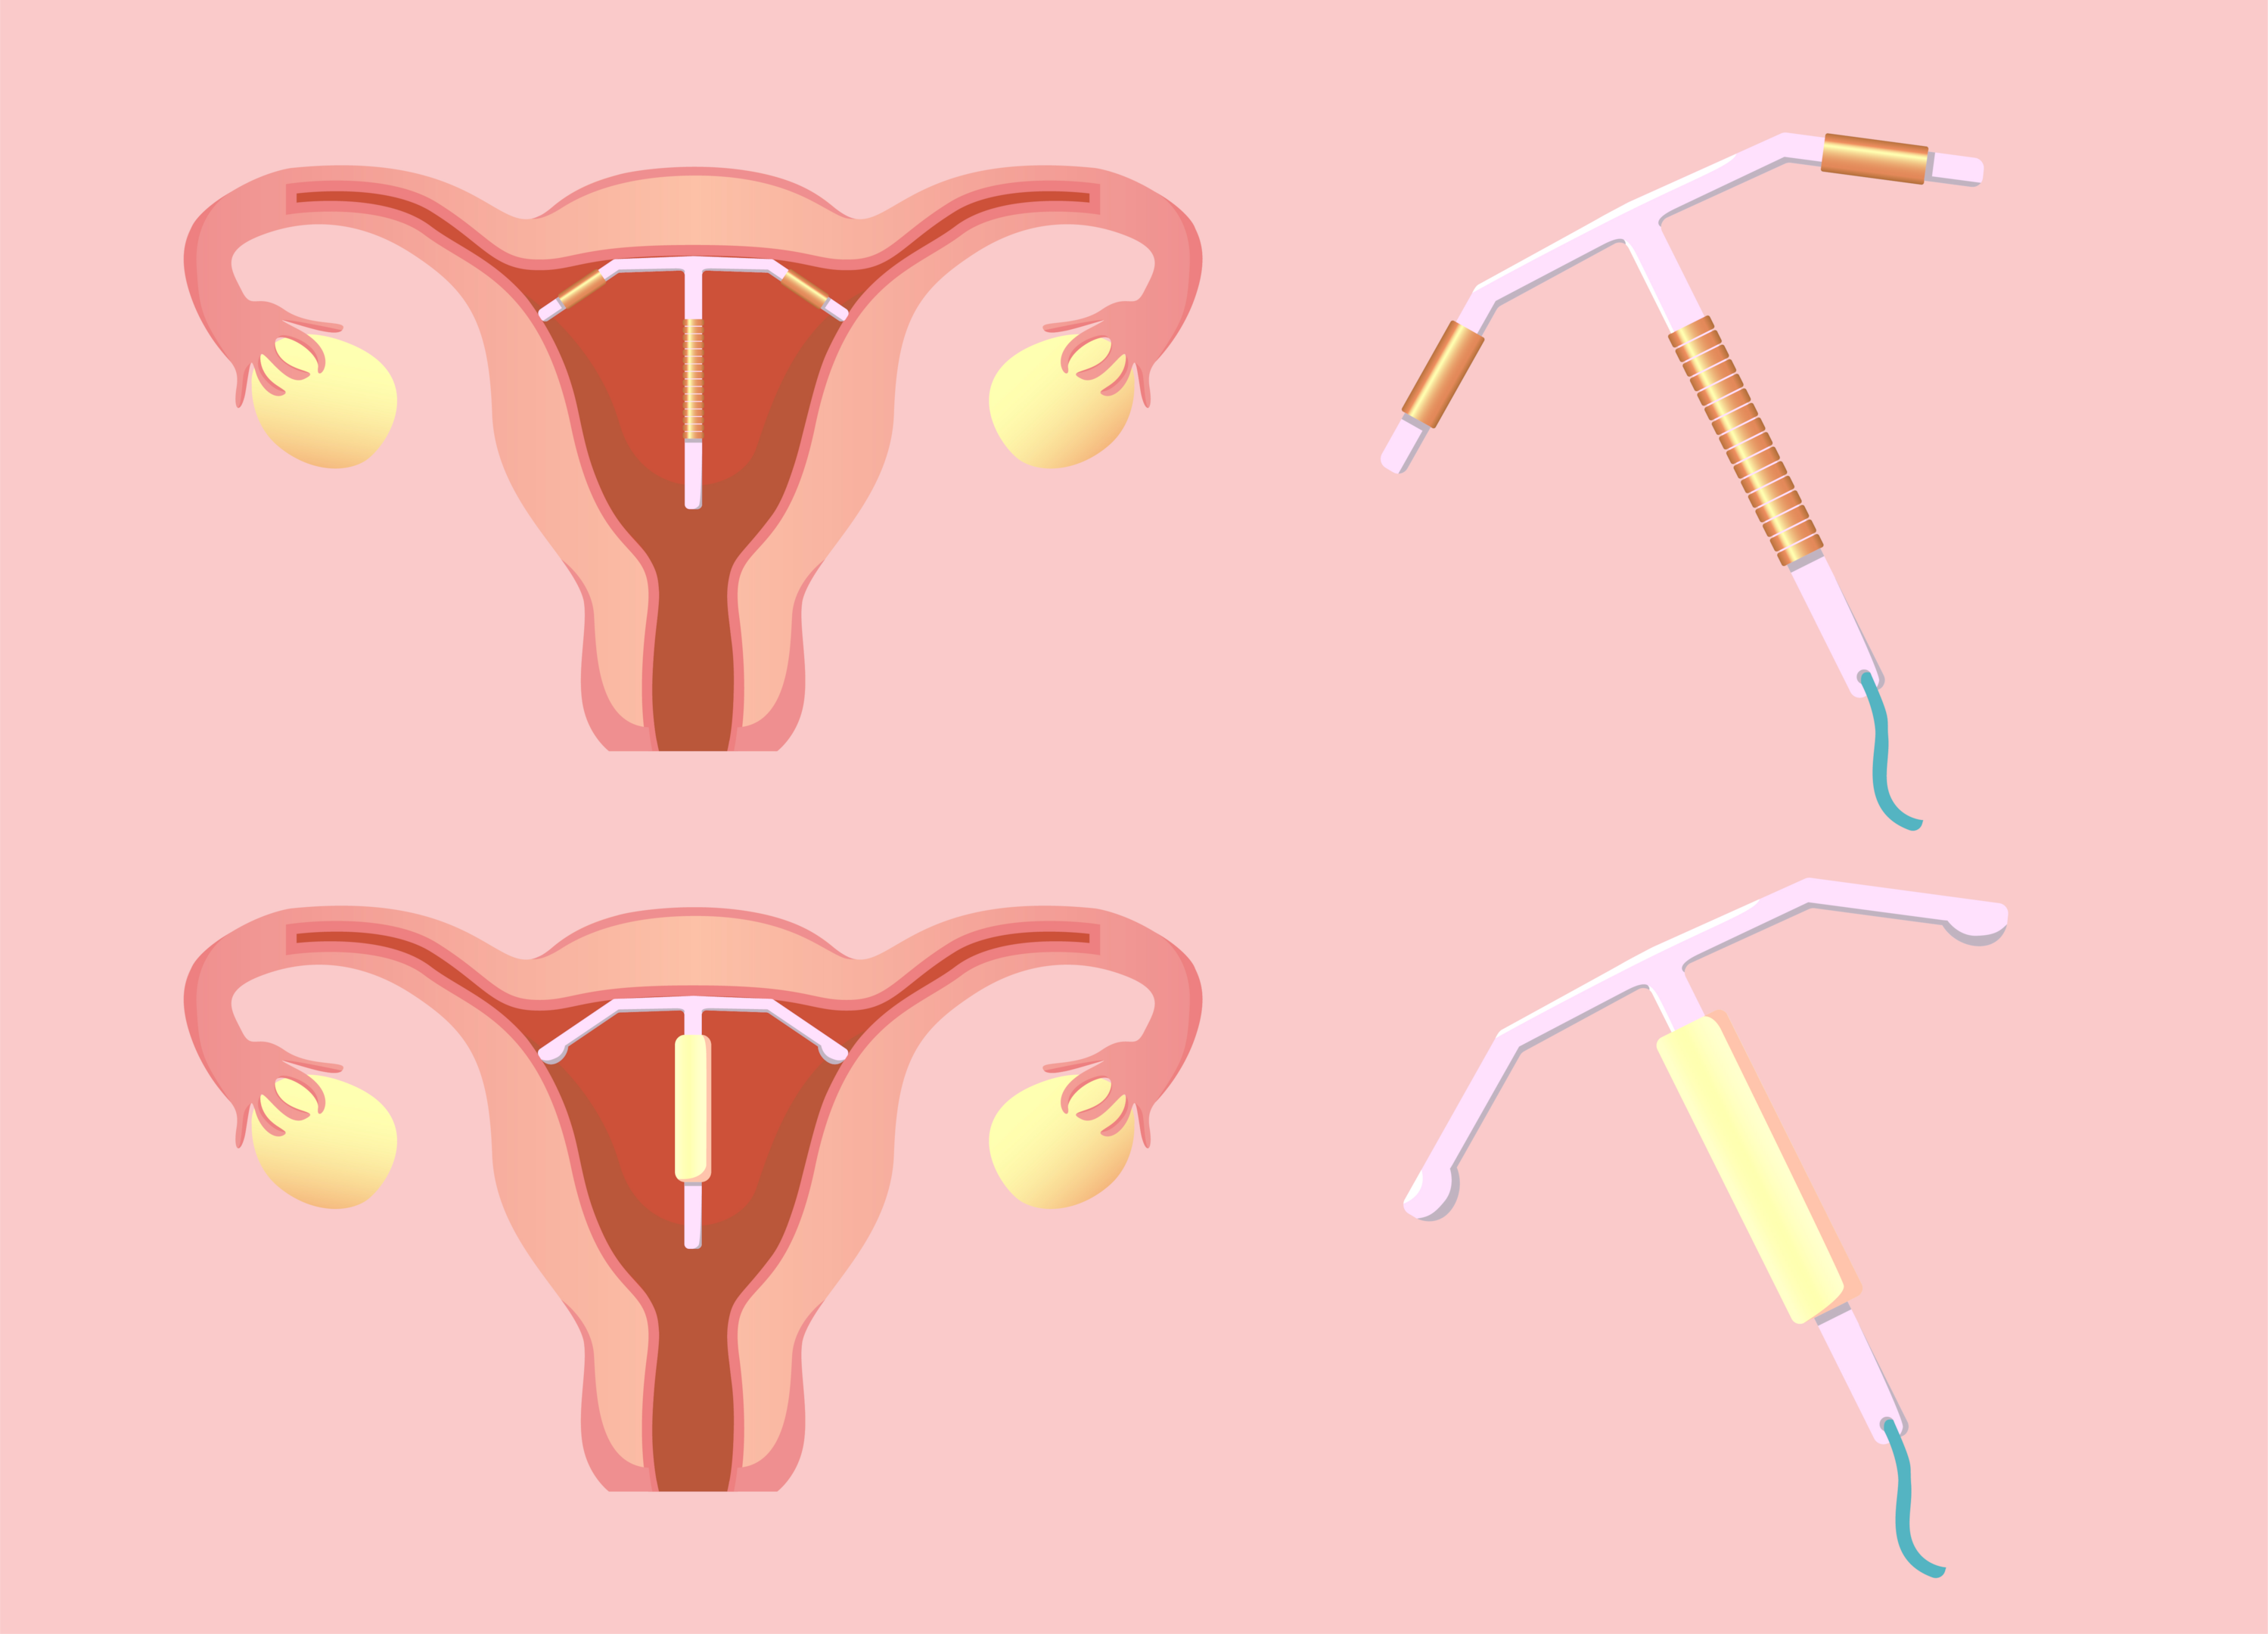 An illustration showing the use of both types of IUDs.